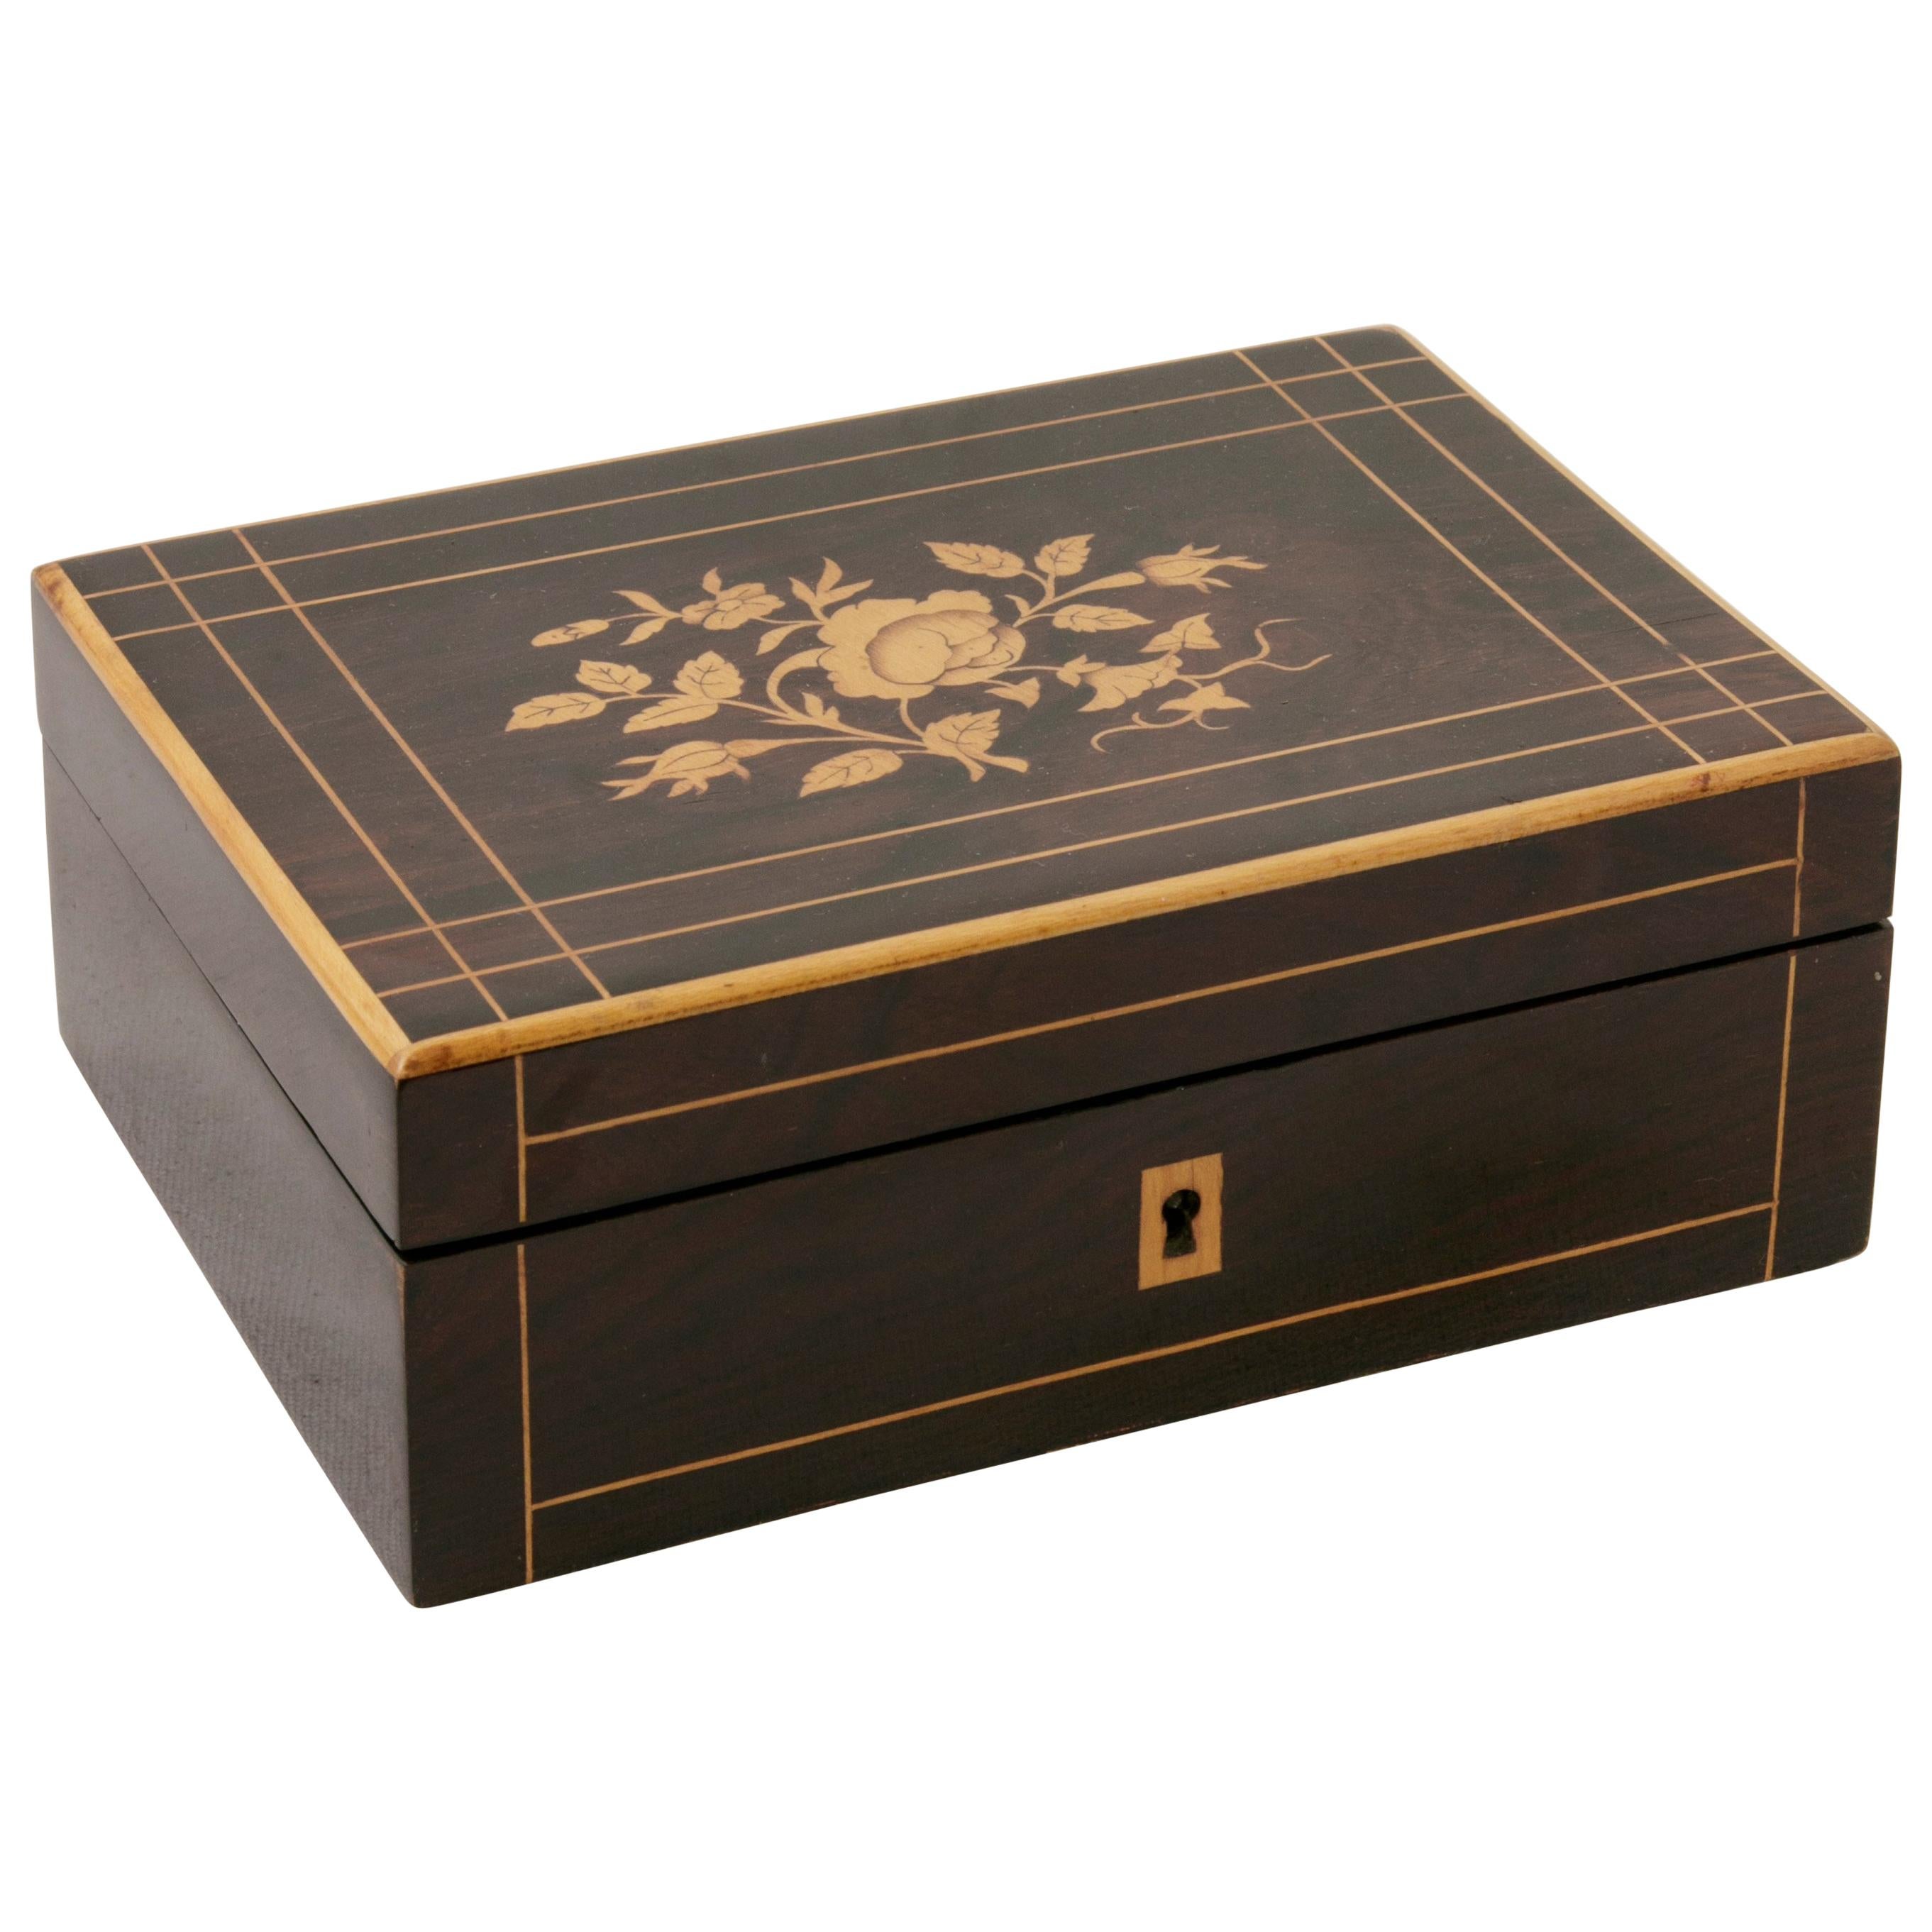 Early 19th Century French Charles X Palisander Sewing Box with Lemon Wood Inlay For Sale